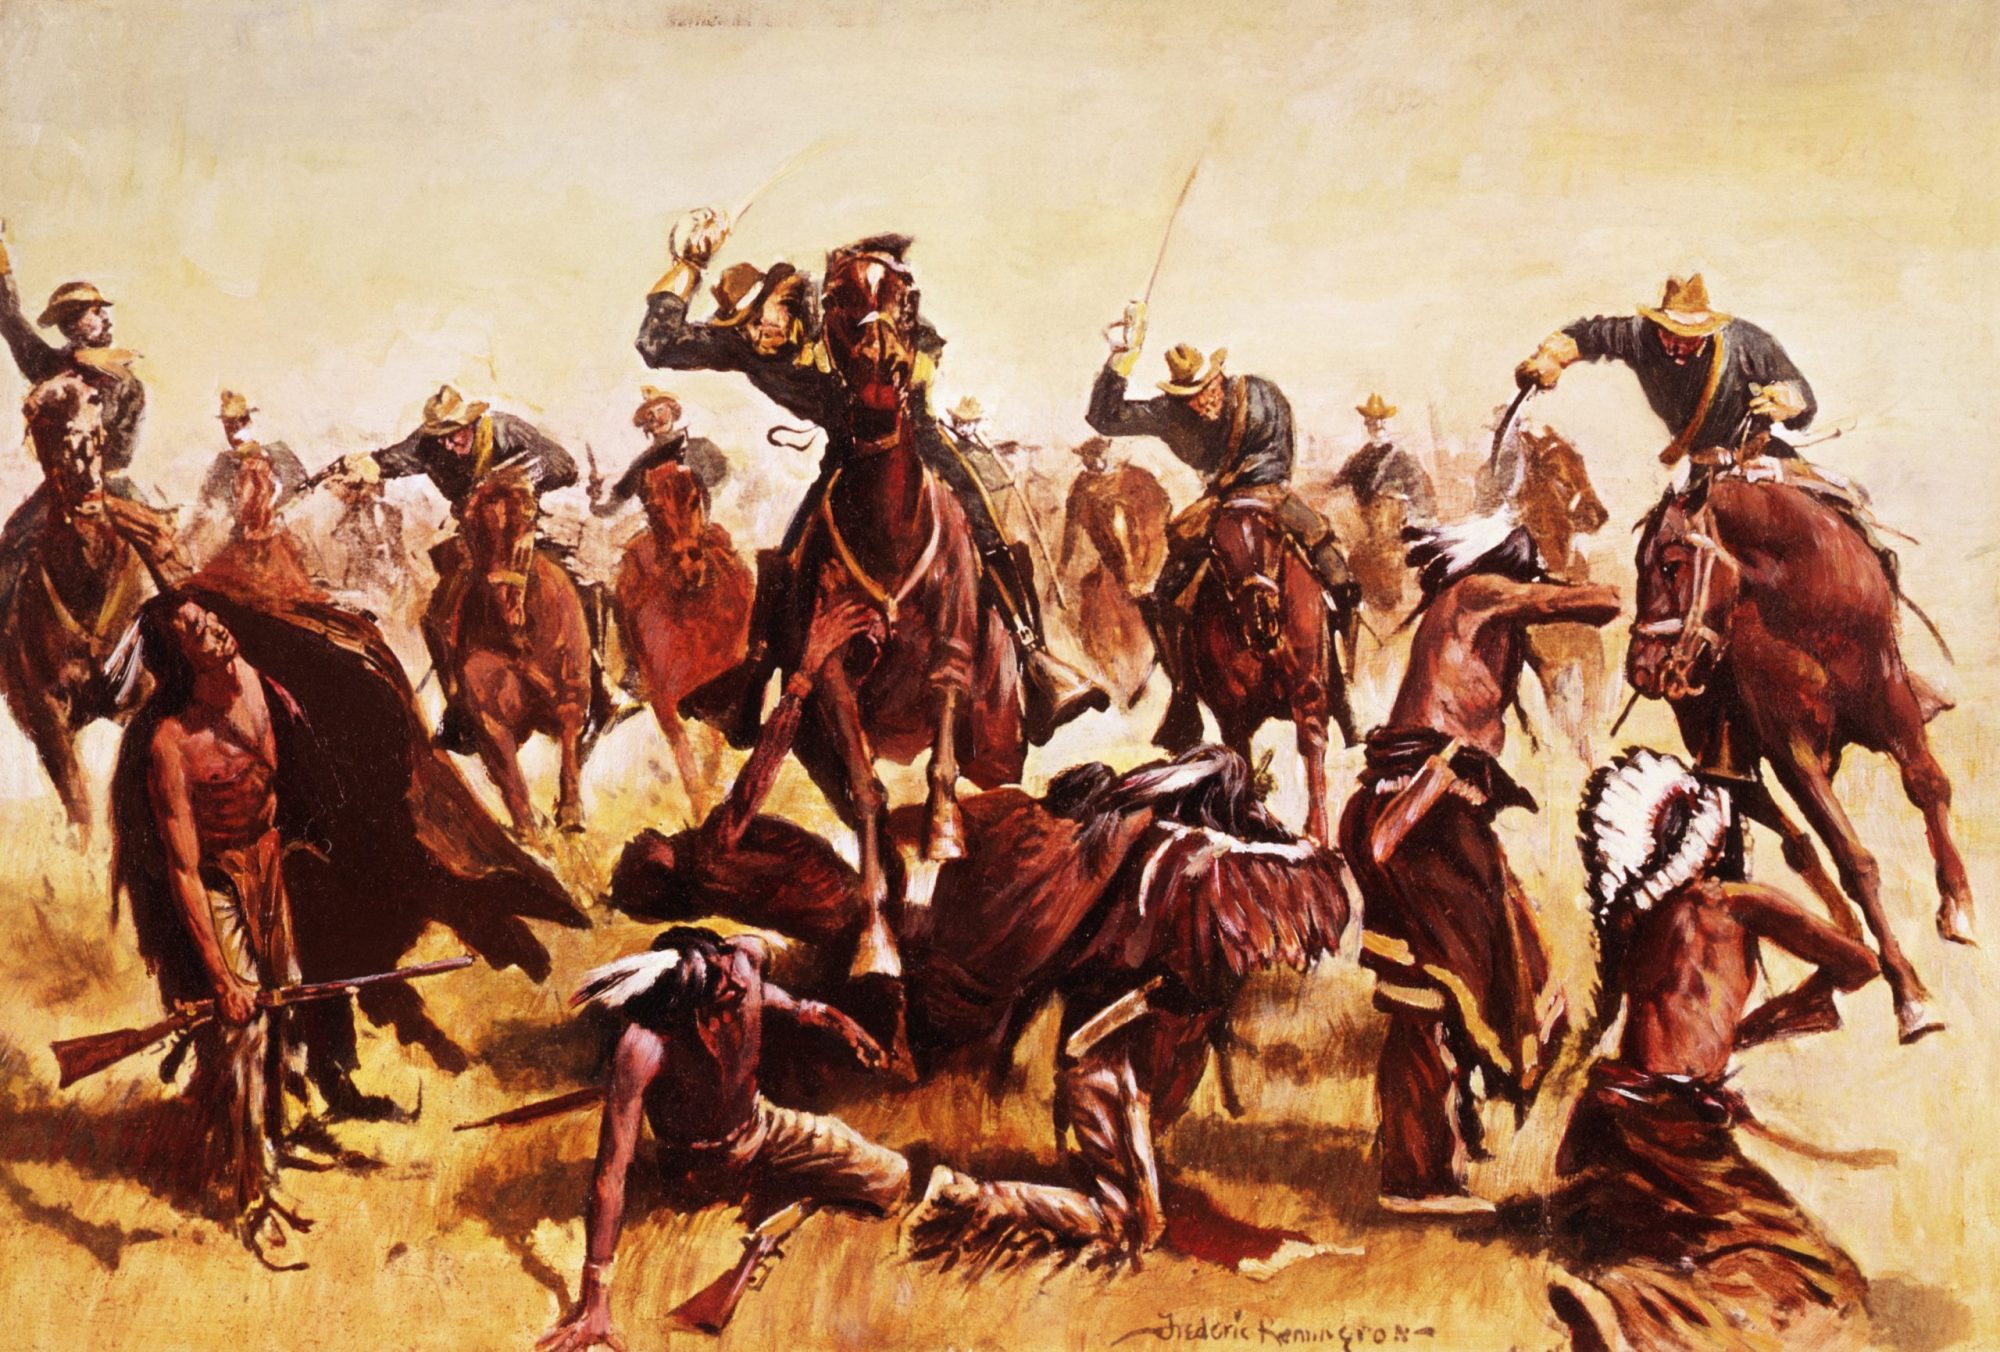 The painting shows Custer and his men on horses slaughtering Native Americans who are on the ground.